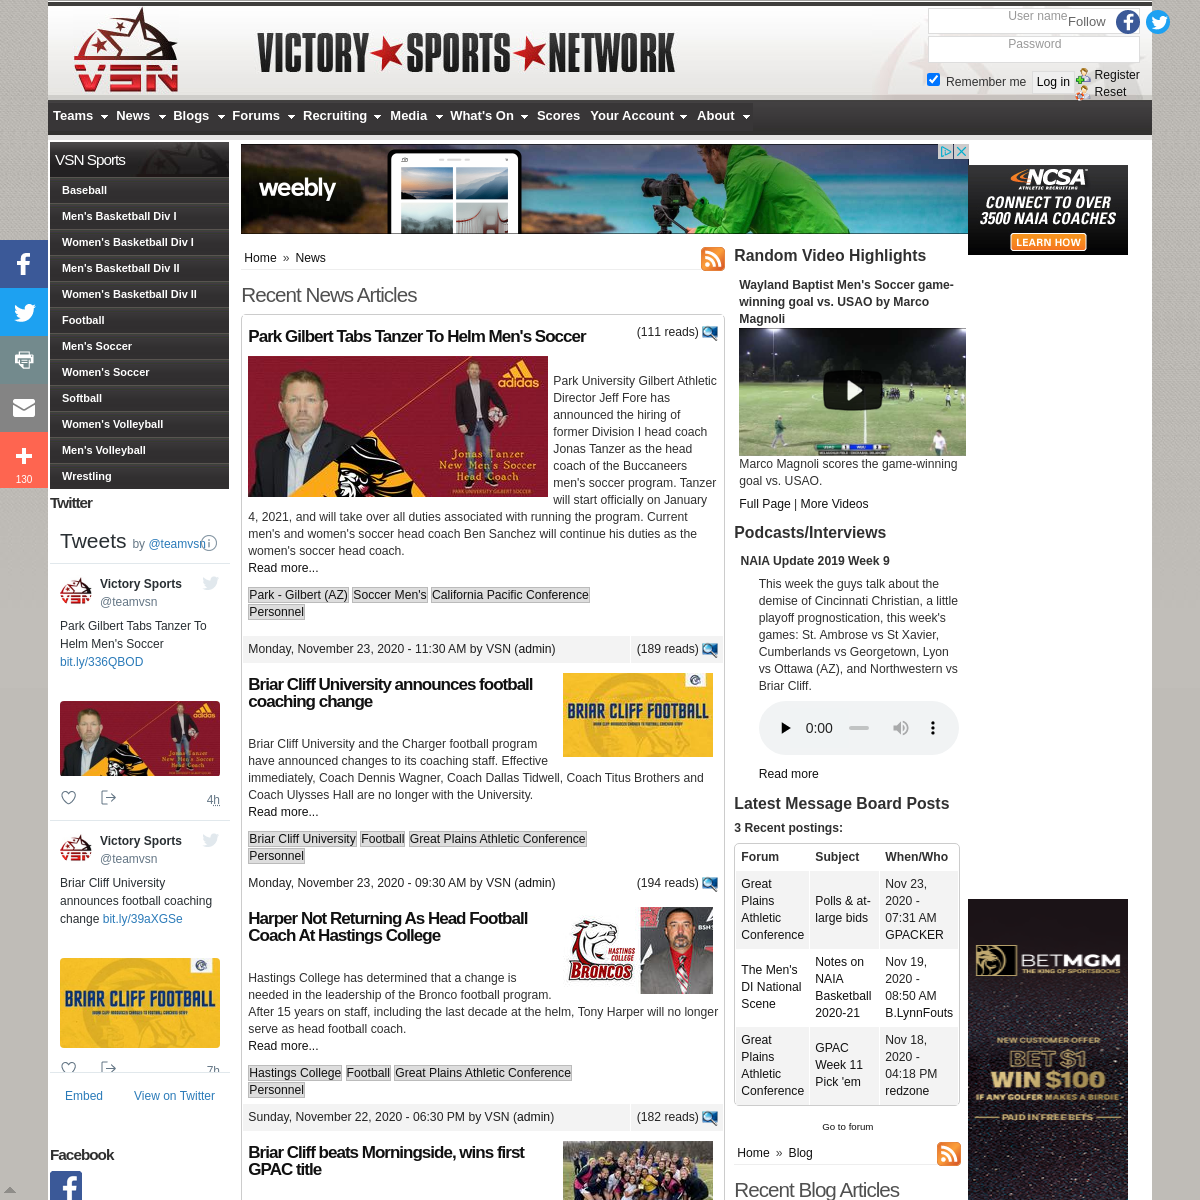 A complete backup of victorysportsnetwork.com